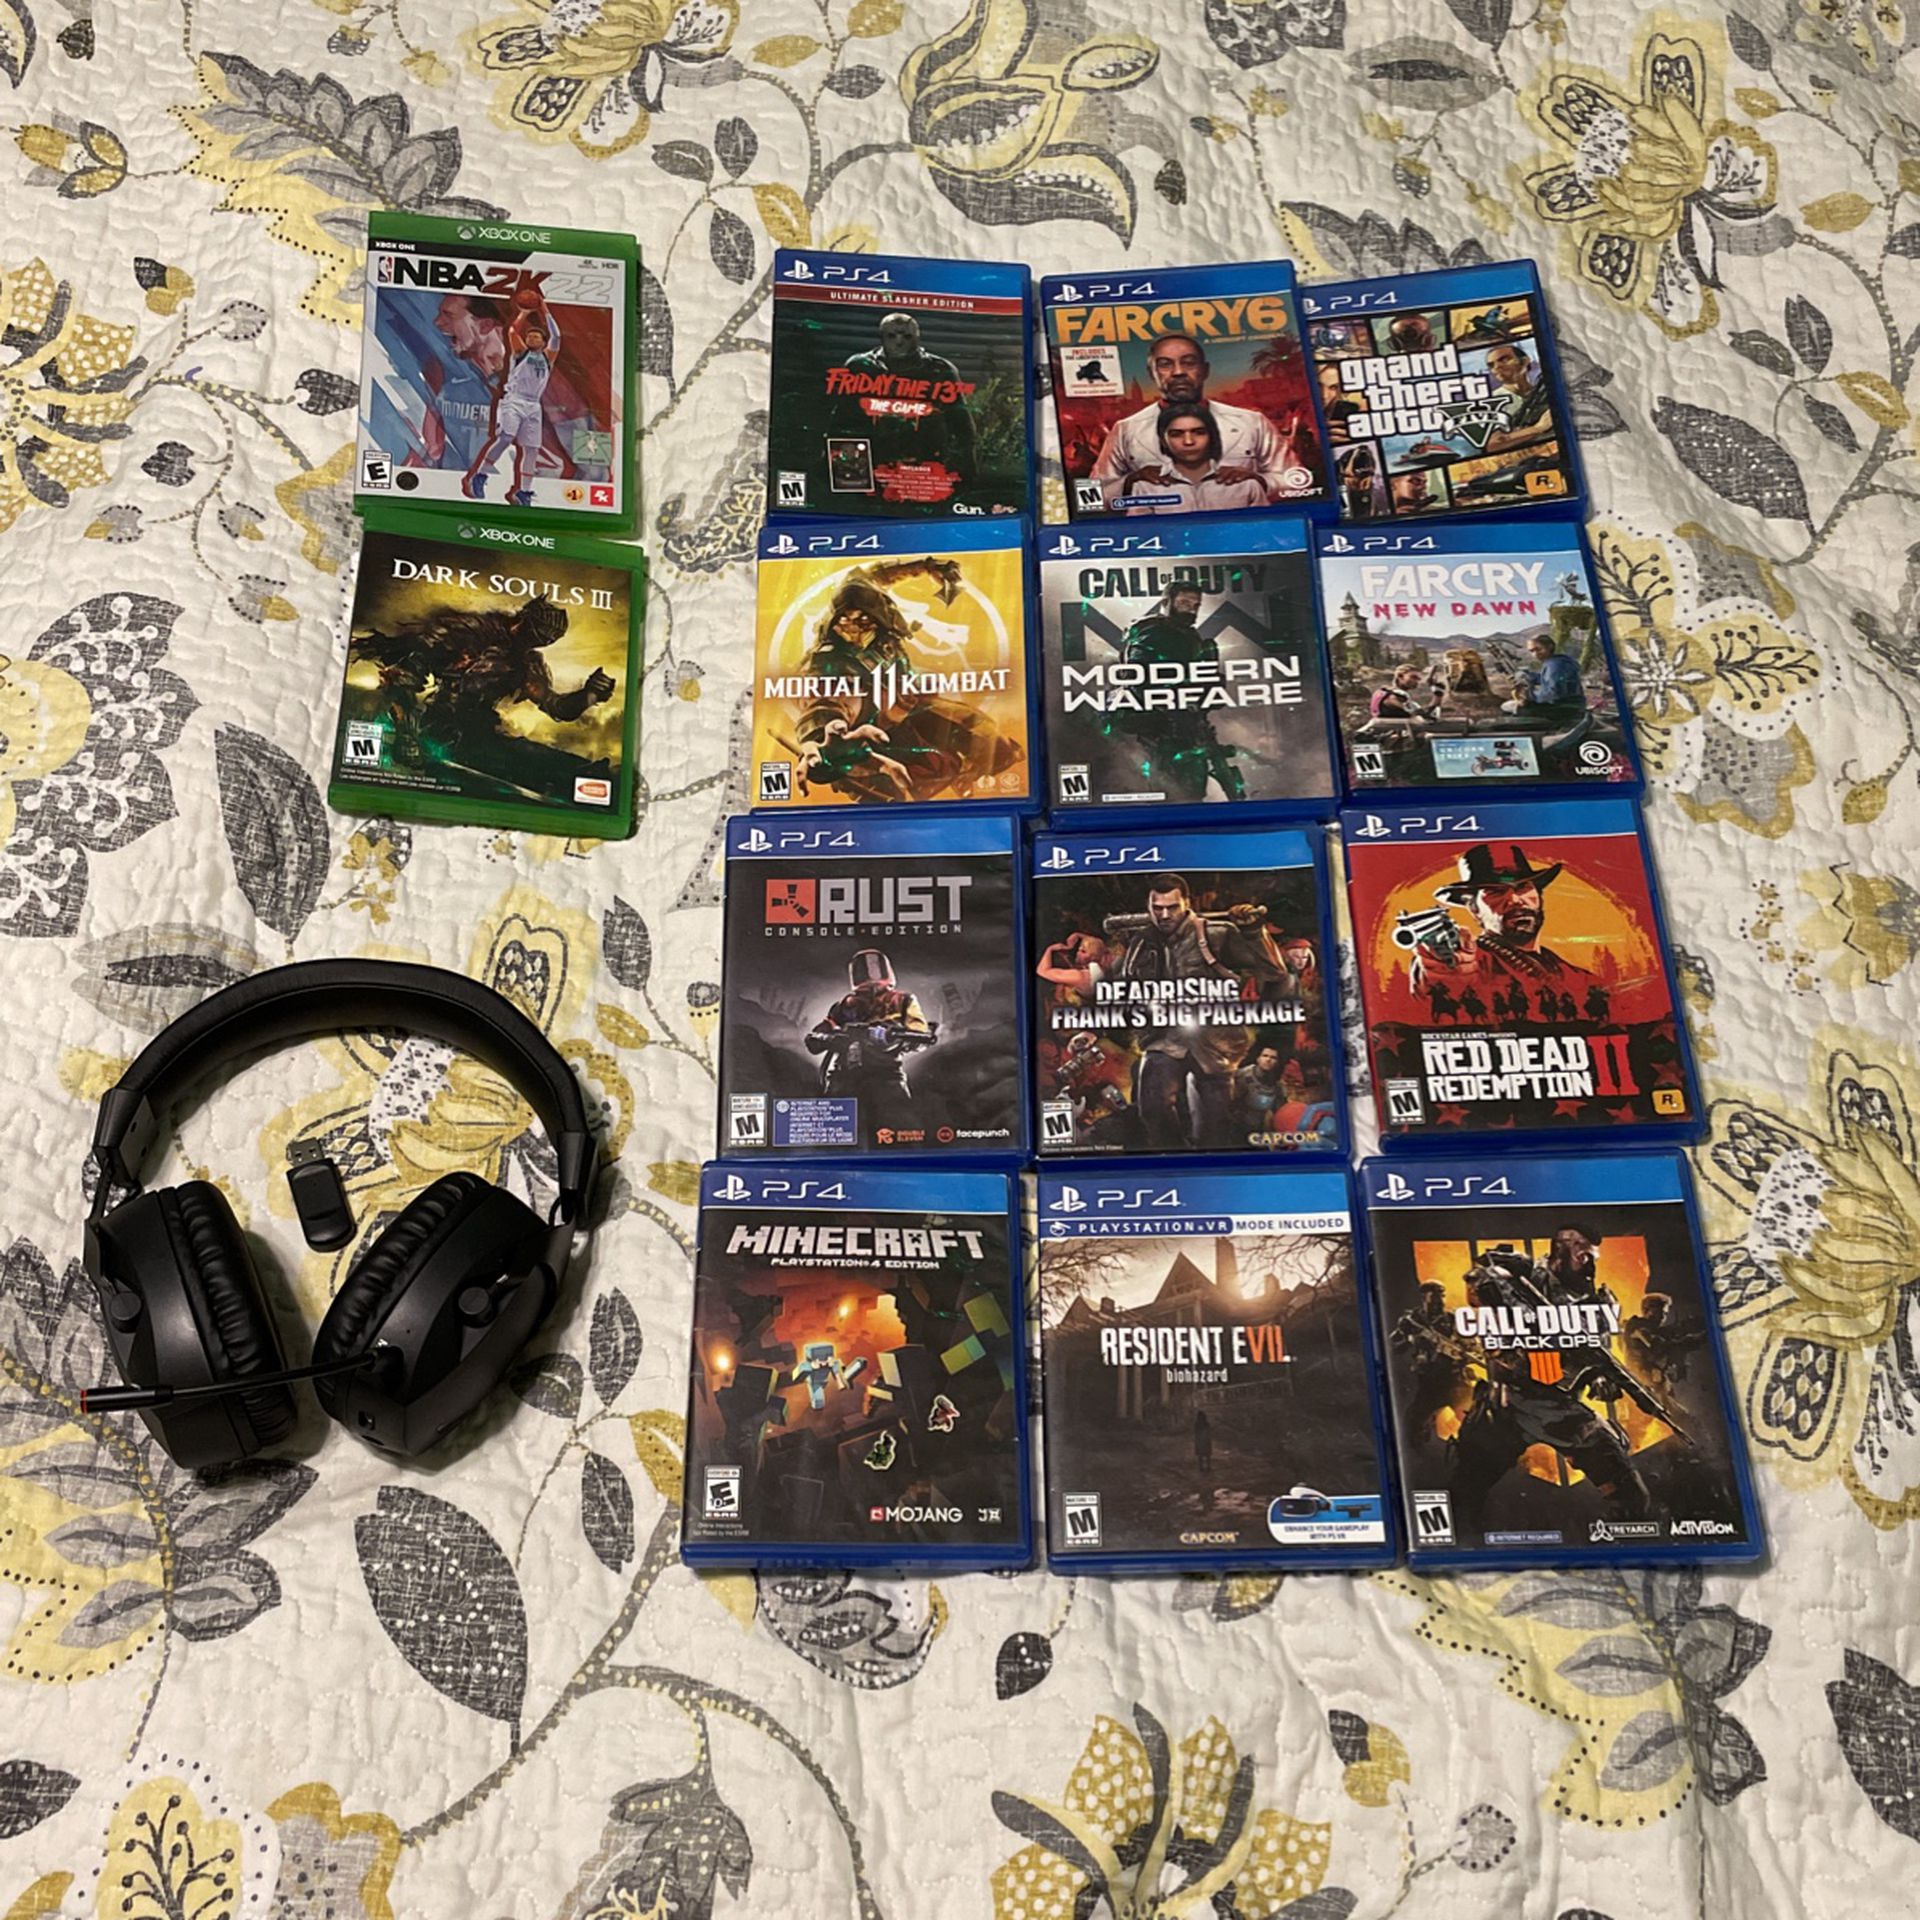 12 PS4 Games And 2 Xbox One Games With A Wireless Headset